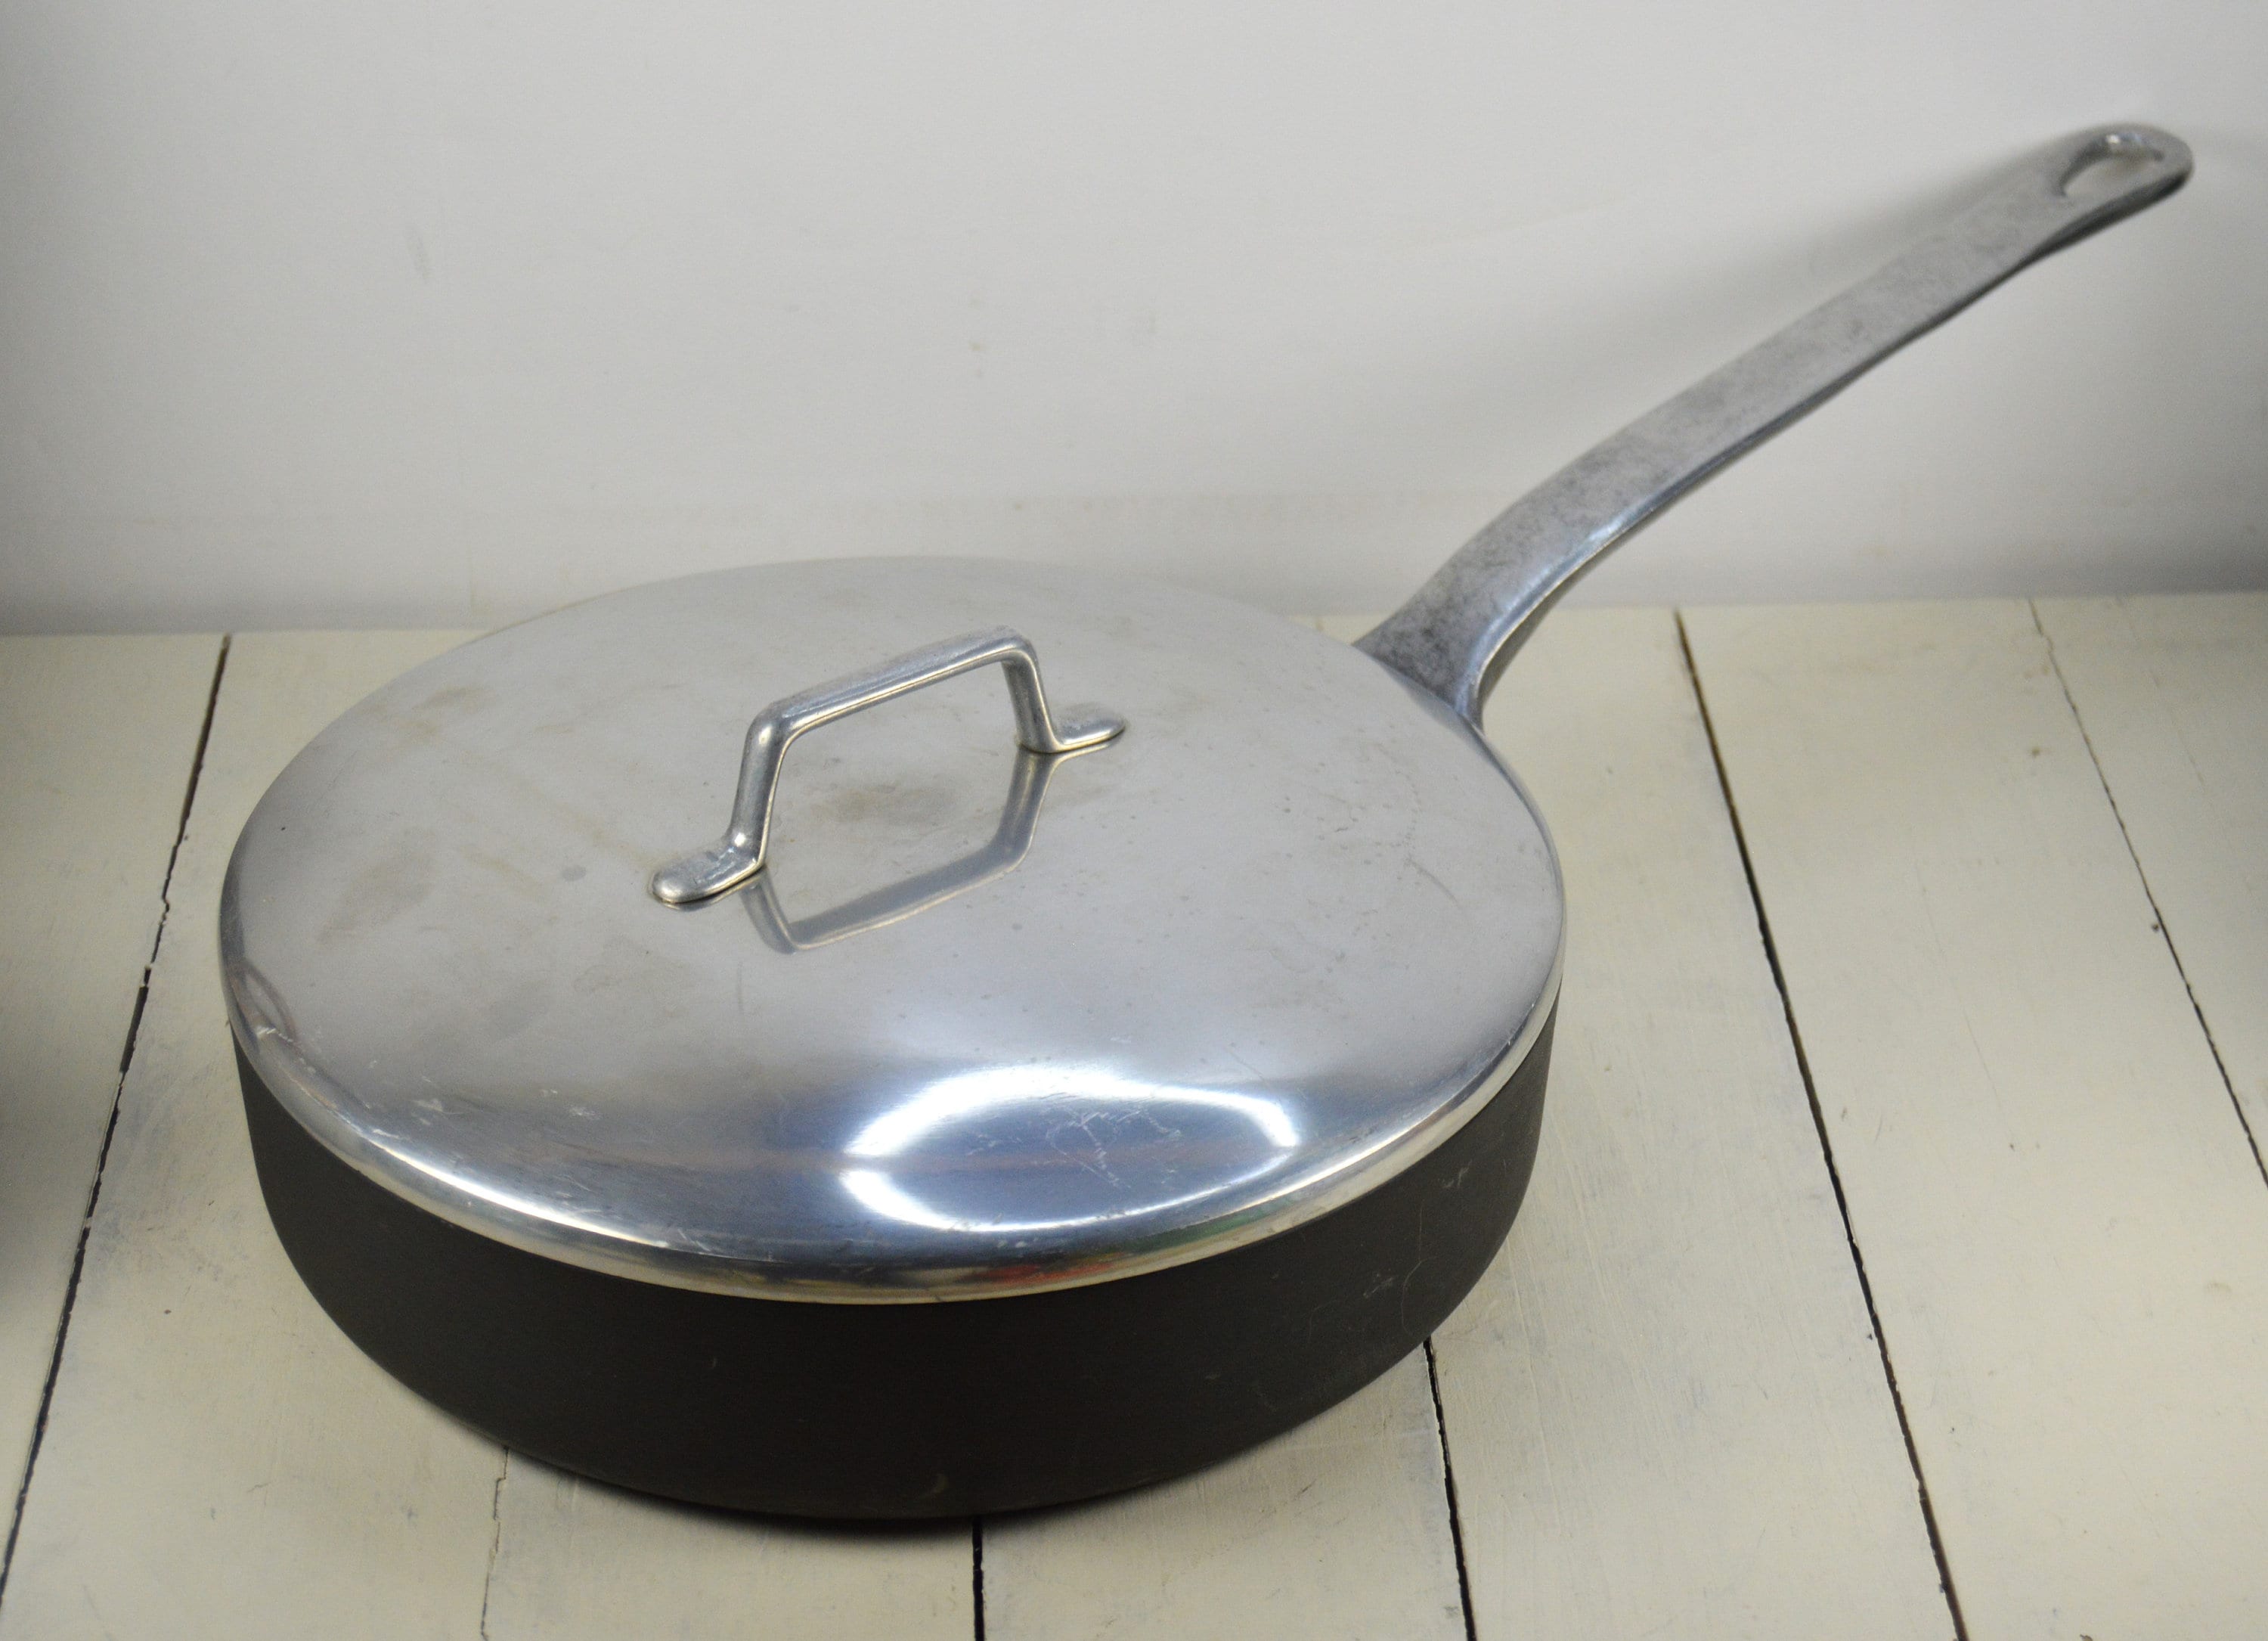 MAGNALITE GHC Aluminum Skillet Pan 13 Inch / 33 cm Made In USA